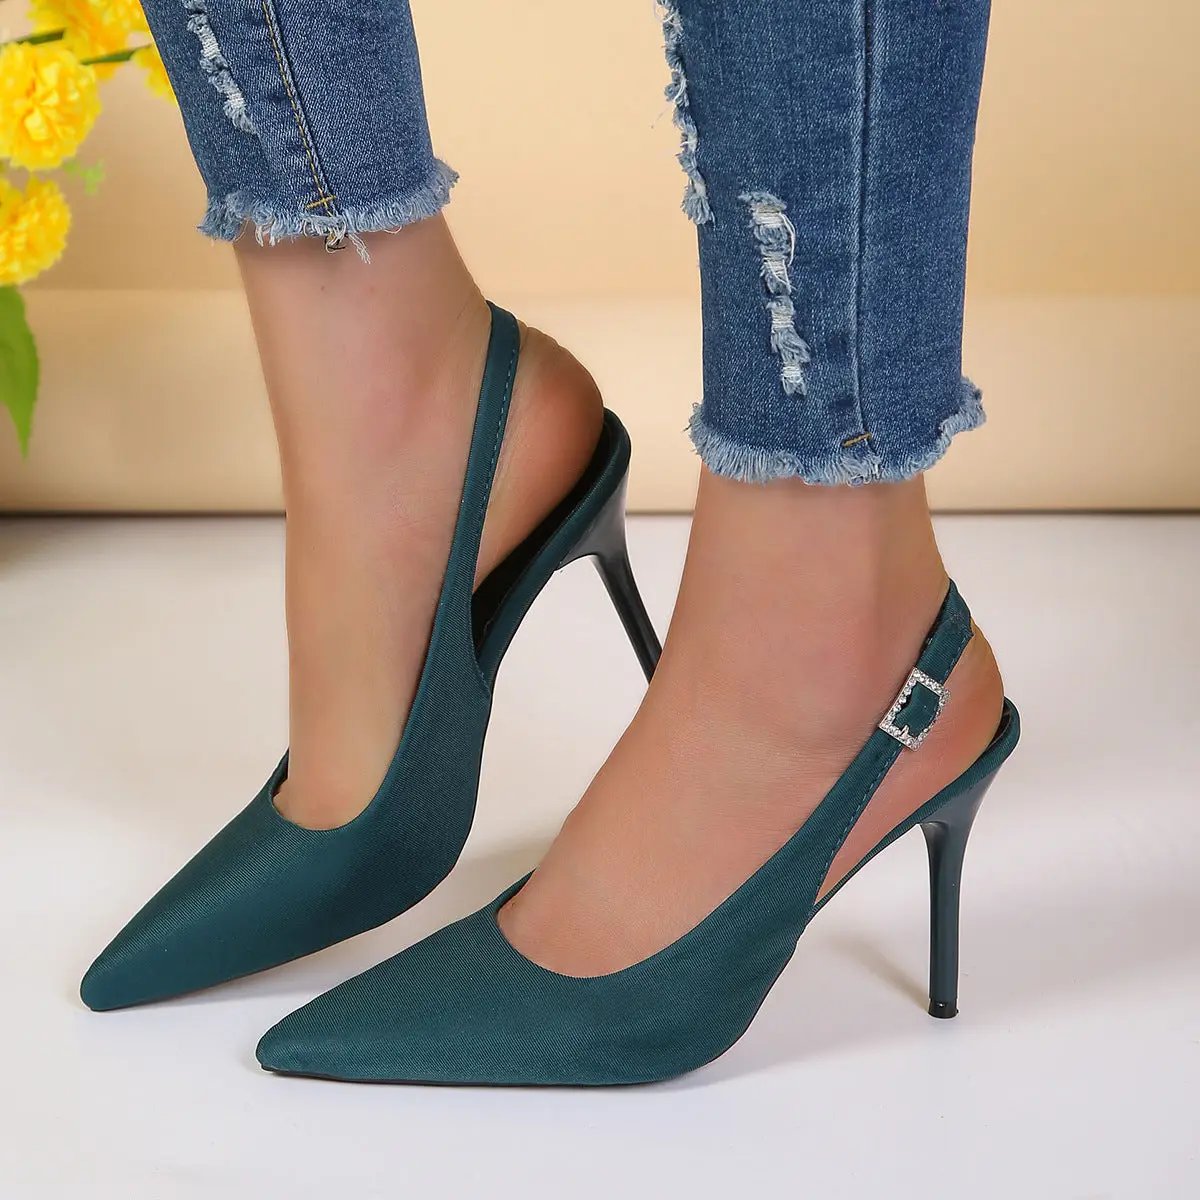 Pointed Toe Buckle Sandals Stiletto High Heels Shoes For Women